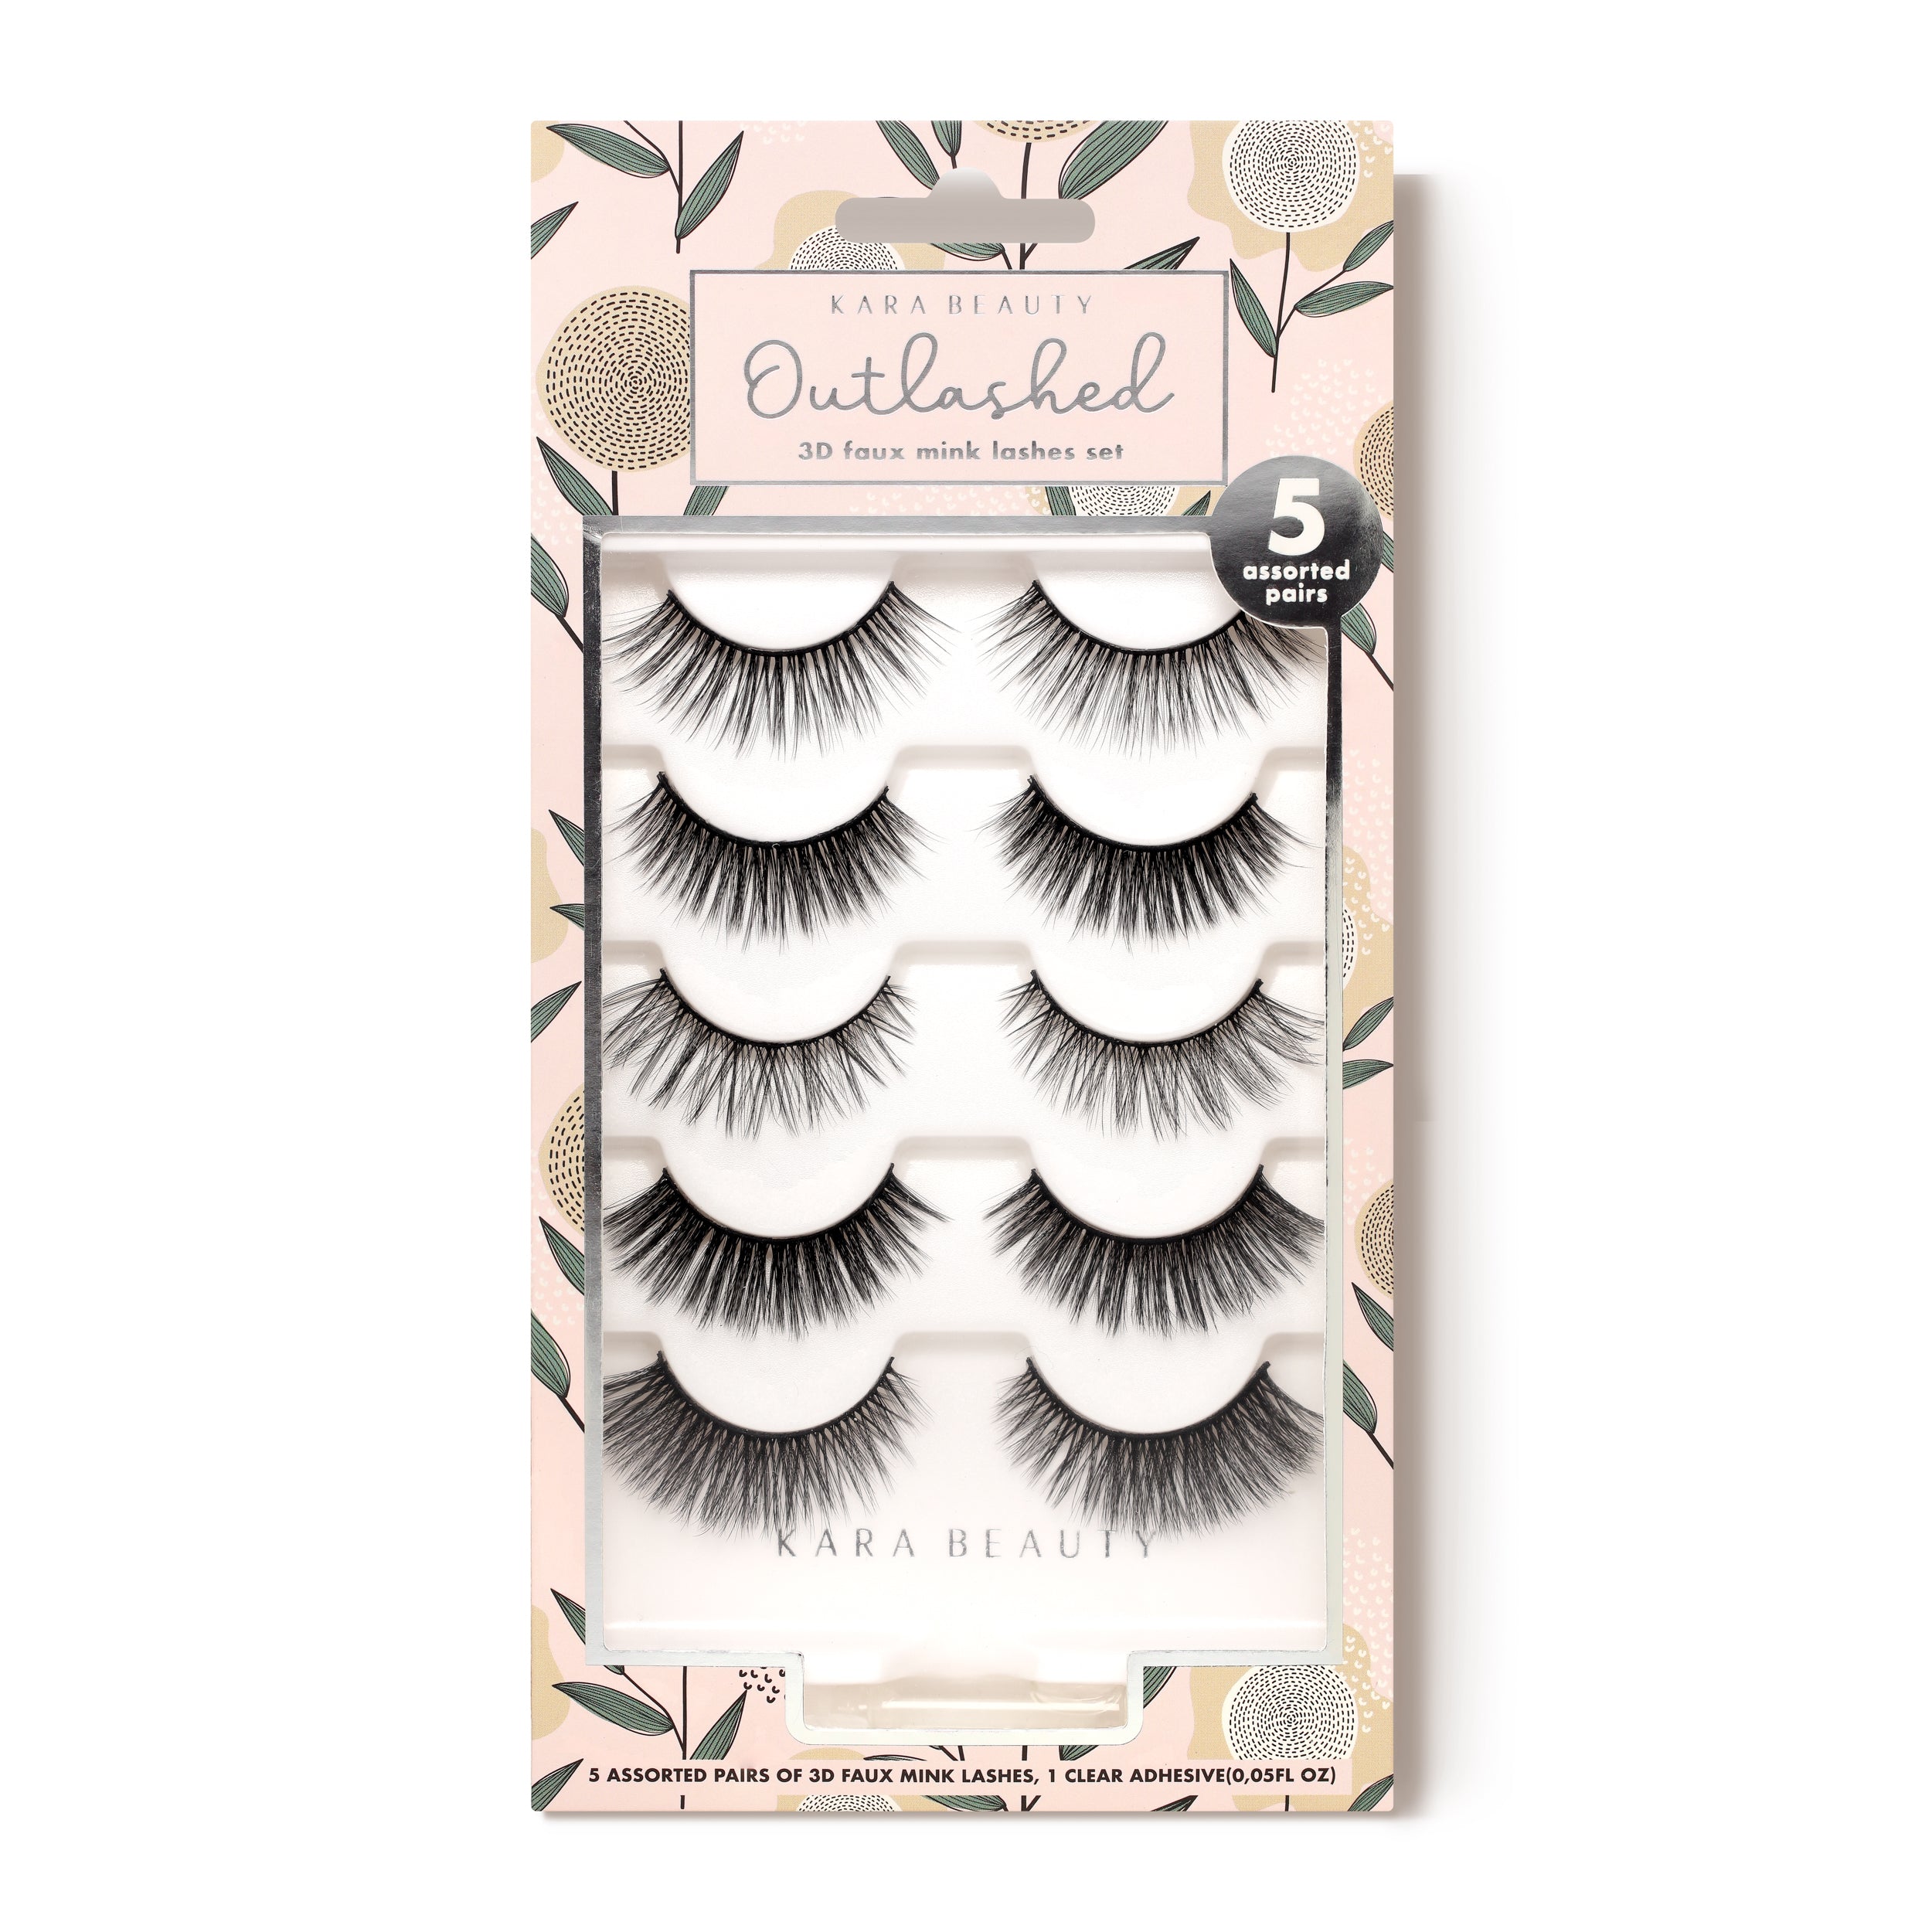 KL5207 OUTLASHED 3D Faux Mink Lashes 5 PAIRS ASSORTED